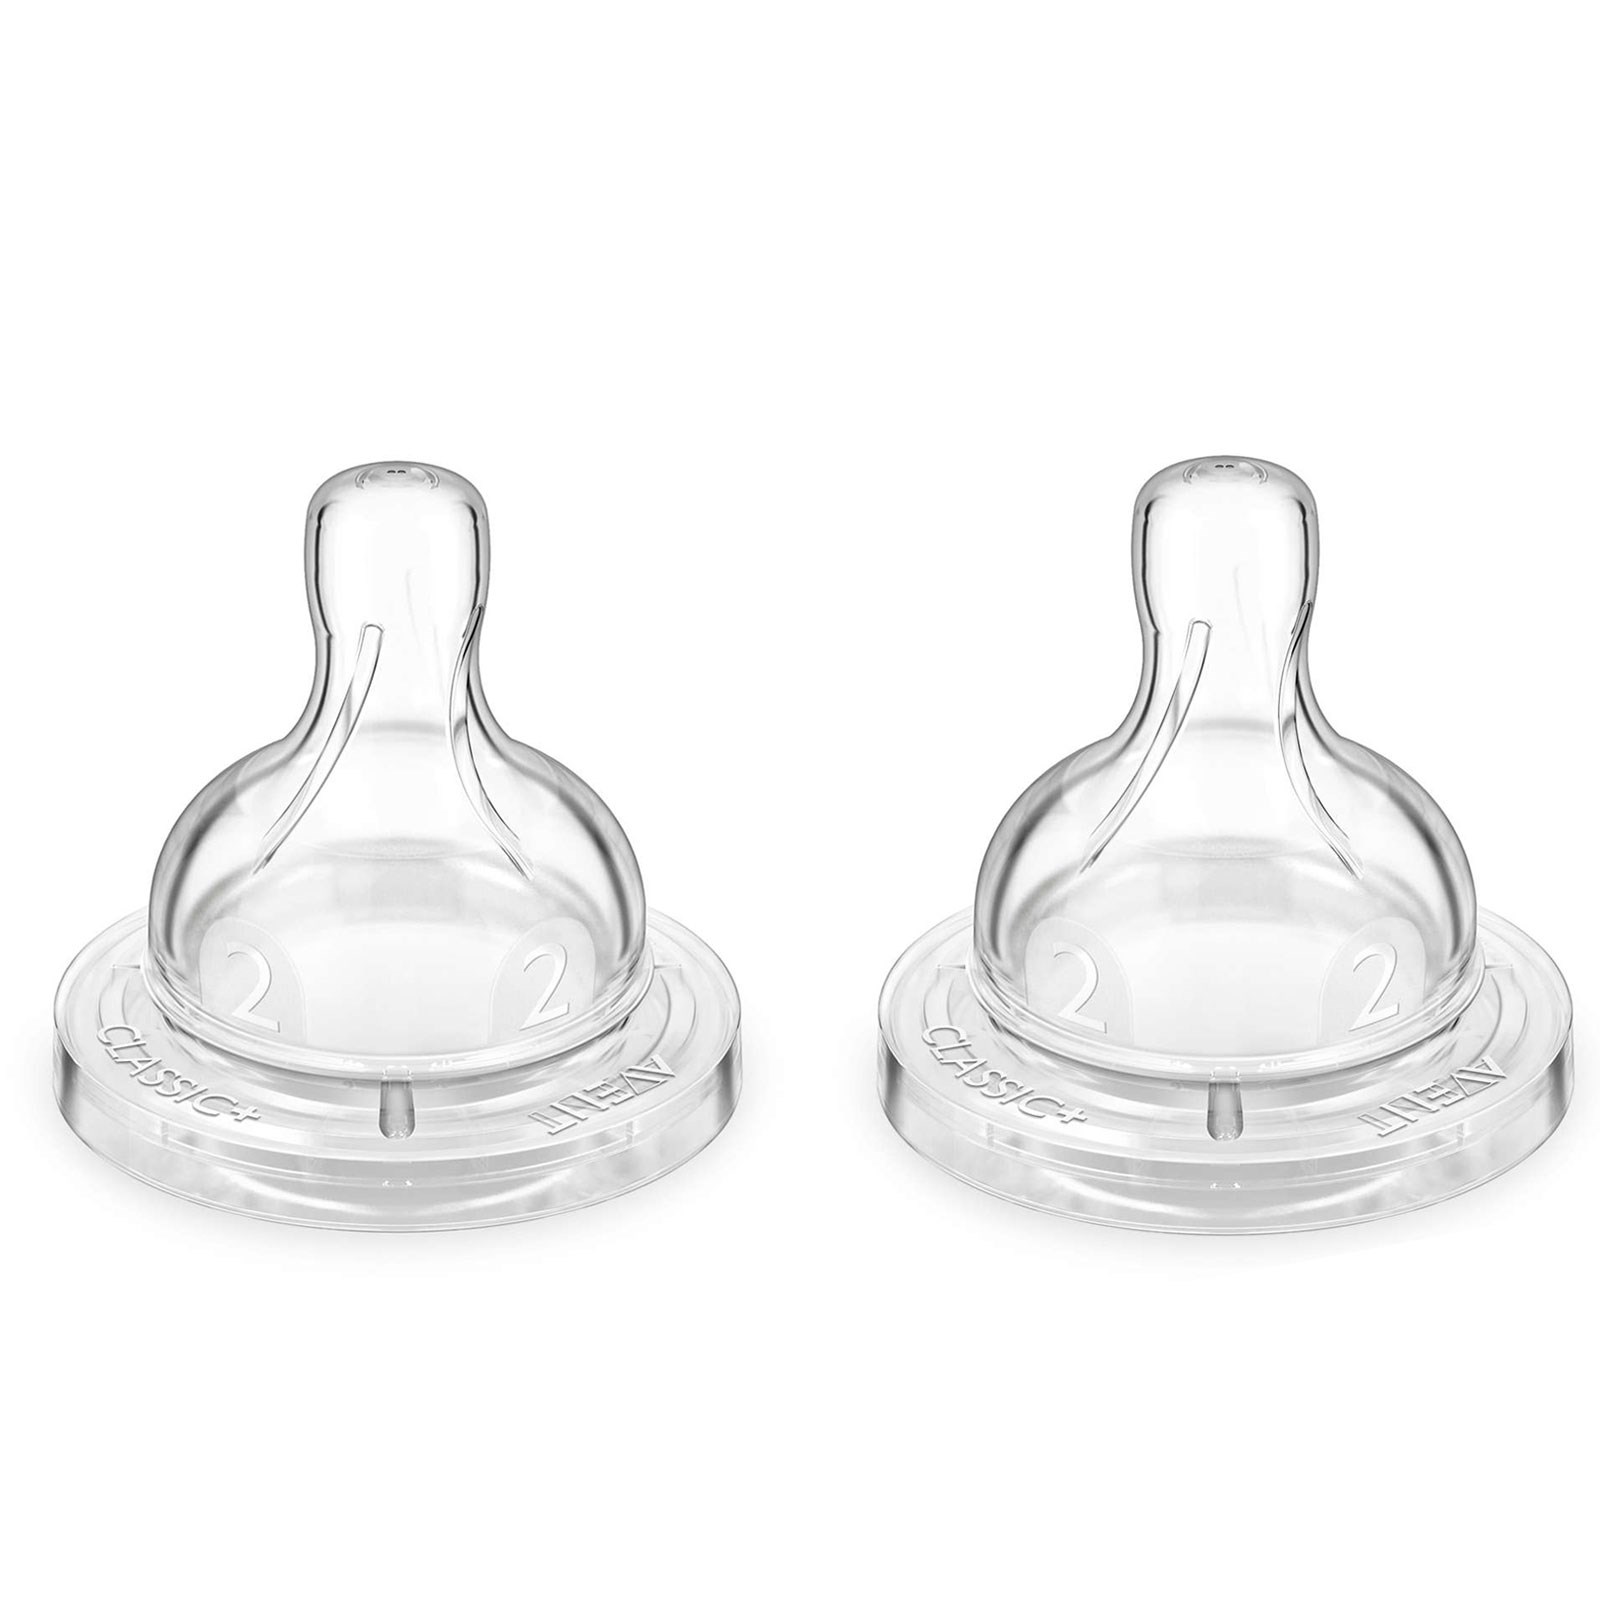 Philips Avent 6 Pack BPA Free Classic Slow Flow Nipple